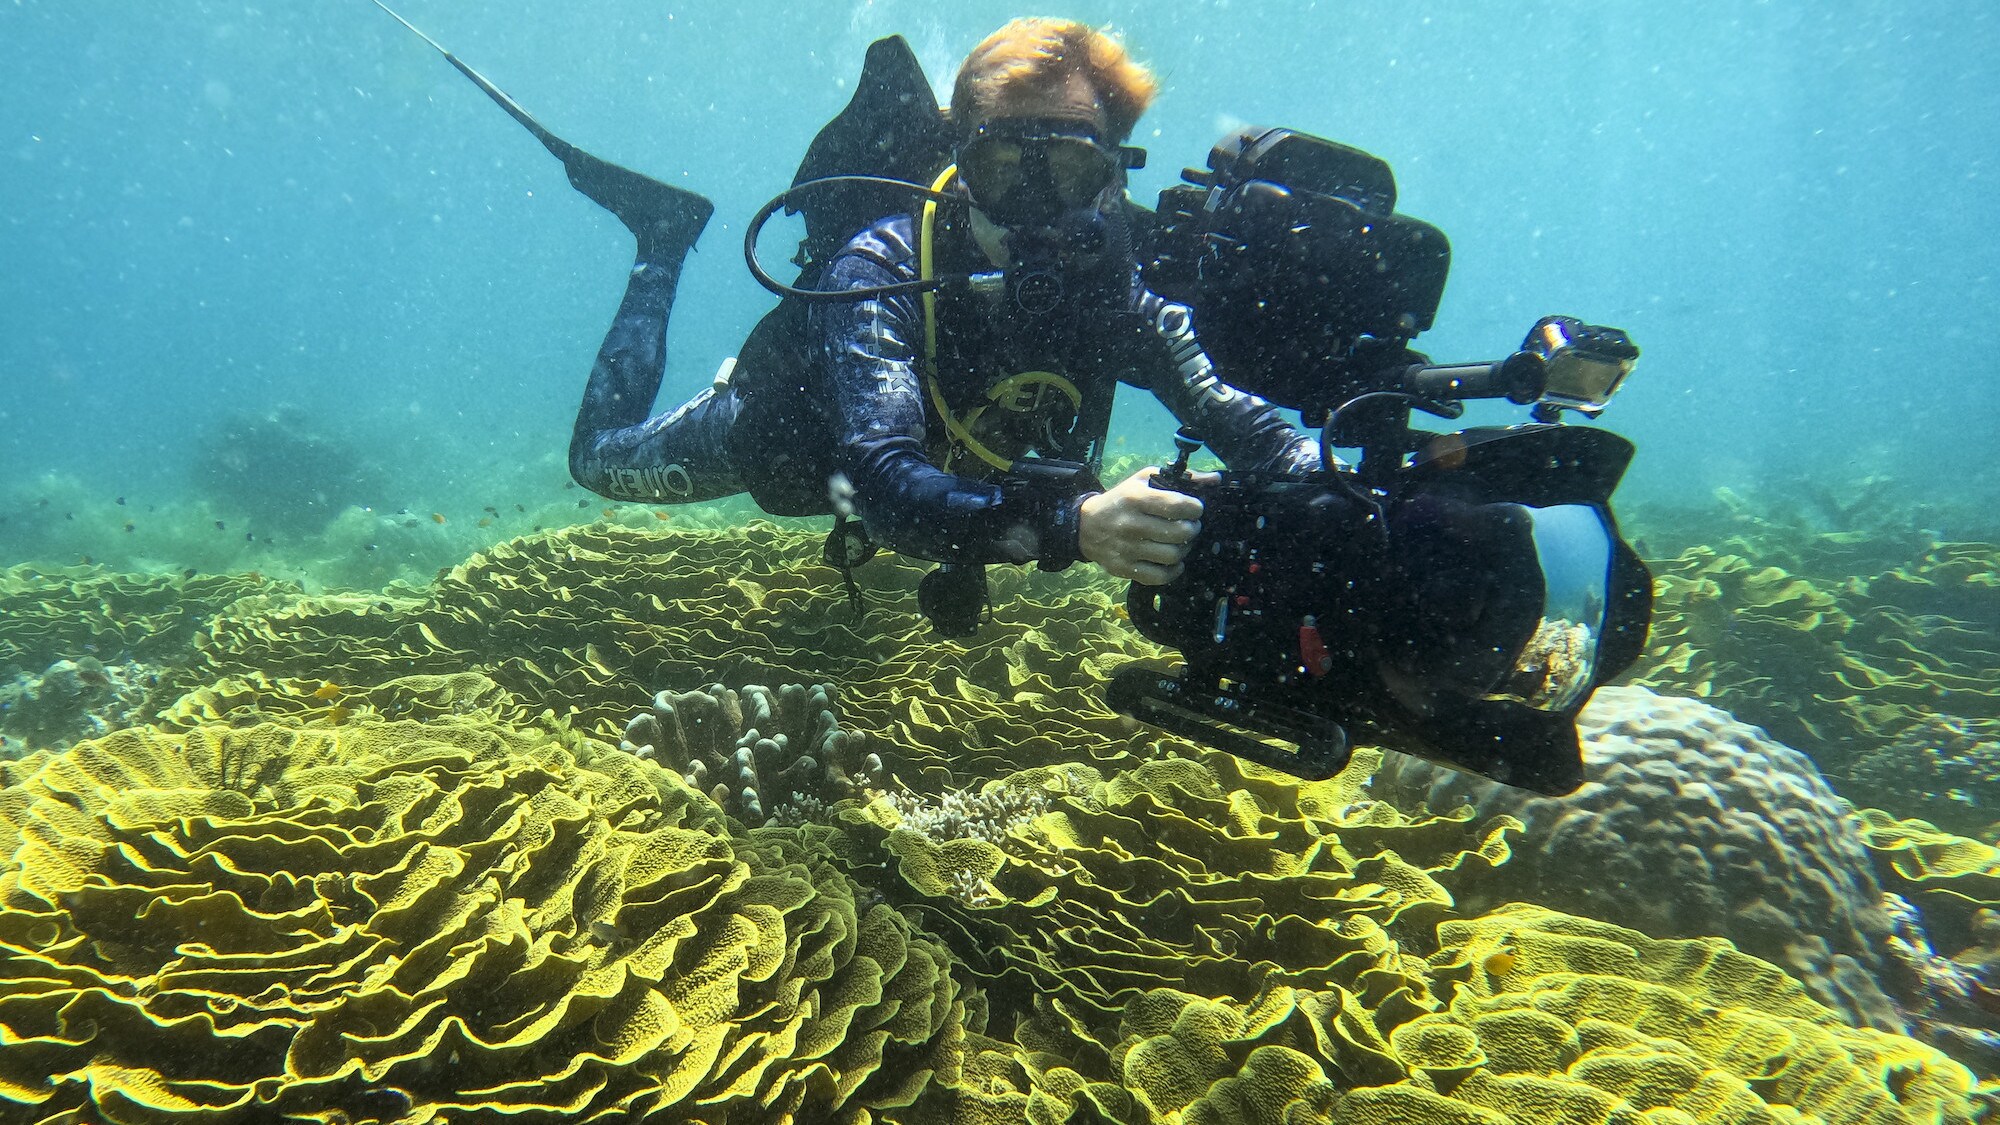 Bertie Gregory filming the coral. (National Geographic for Disney+/Anna Dimitriadis)